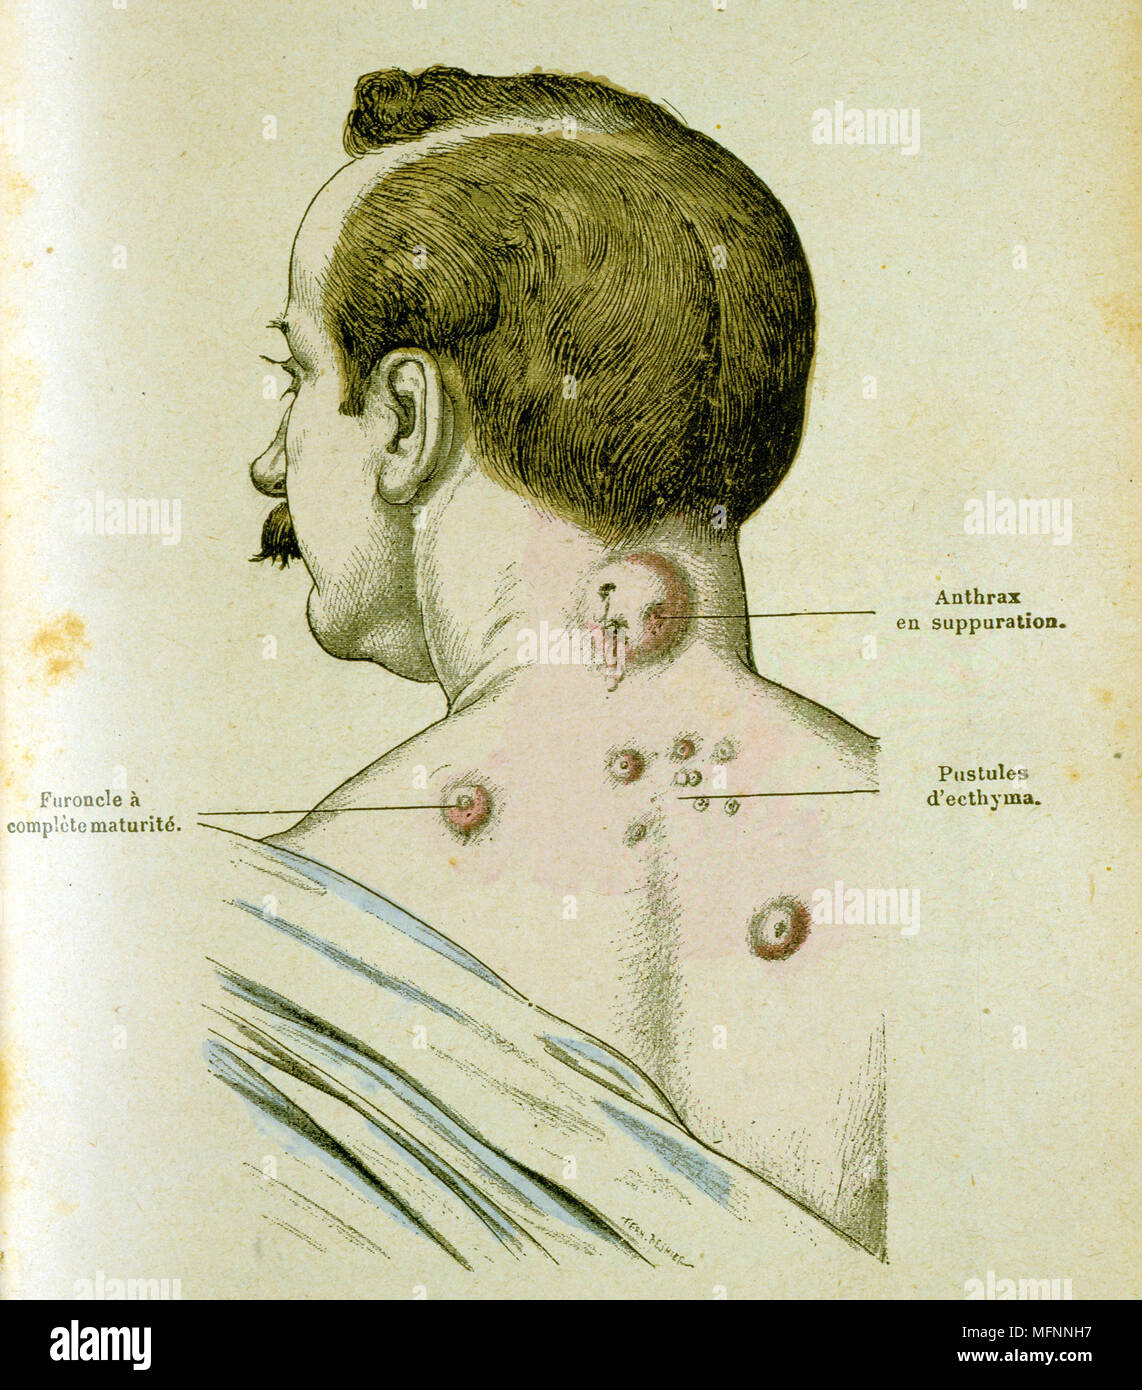 Development of pustules in a man suffering from Anthrax, a disease which could be c ontracted from contact with infected farm animals. The anthrax bacillus was the first bacterium to be identified (1841) and in 1881 Louis Pasteur successfully tested a vaccine on sheep. Engraving c1895. Stock Photo